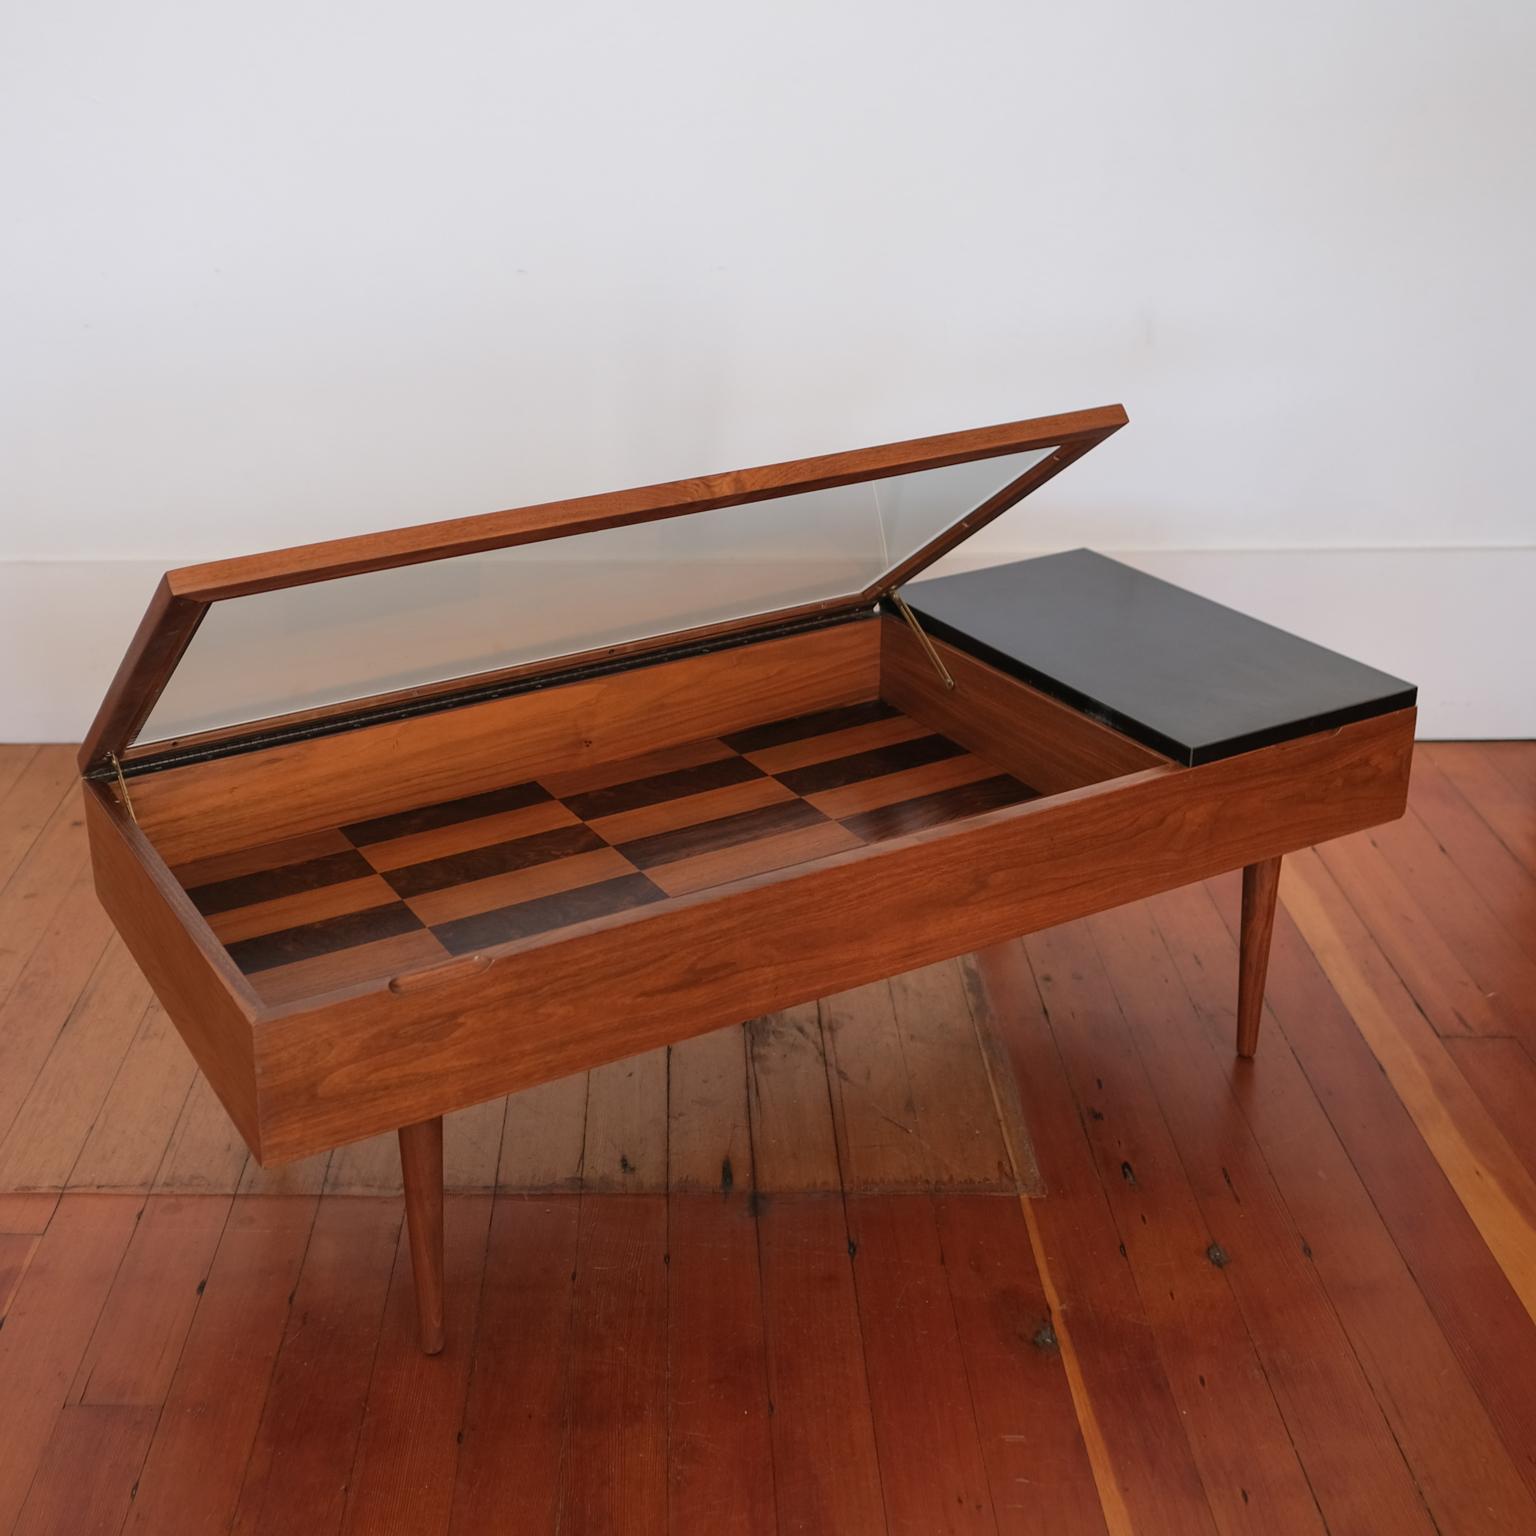 Walnut and rosewood coffee table by Stewart MacDougall for Glenn of California. There is a vitrine side for display and a divided storage area is under the black laminate. Both sections of the table open with discreet piano hinges. This is an